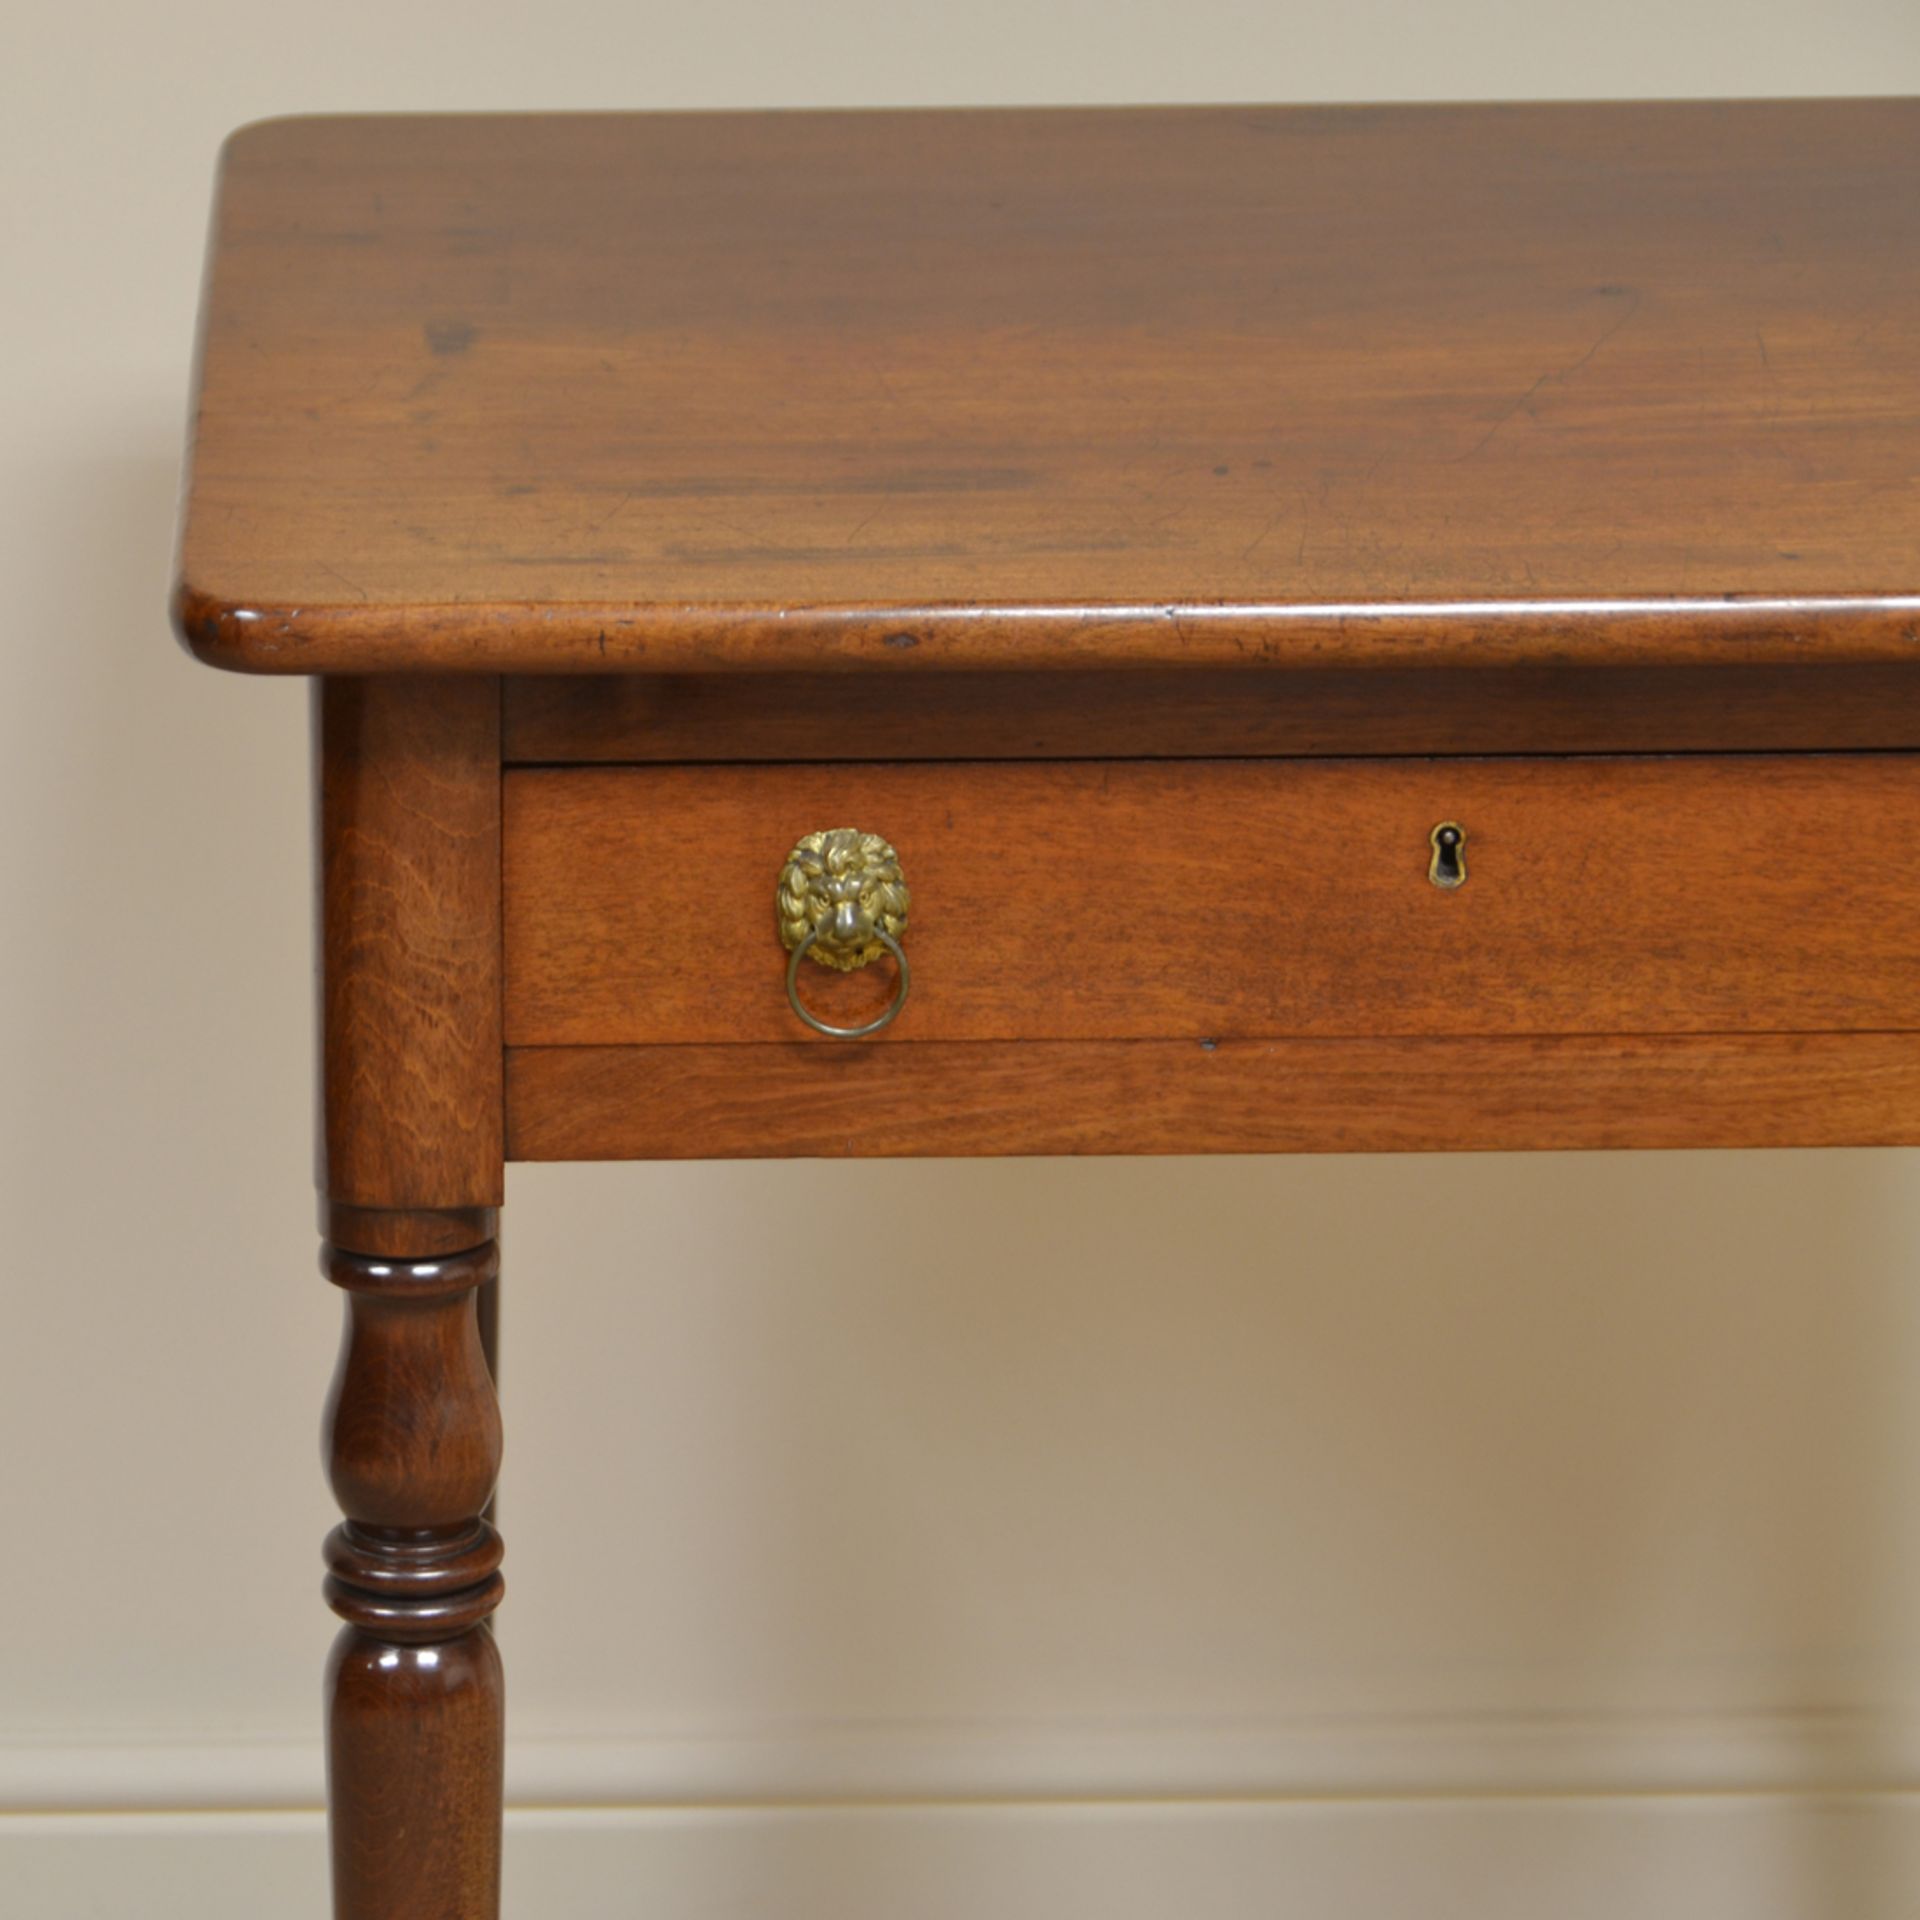 Regency Mahogany Antique Side Table - Image 4 of 7